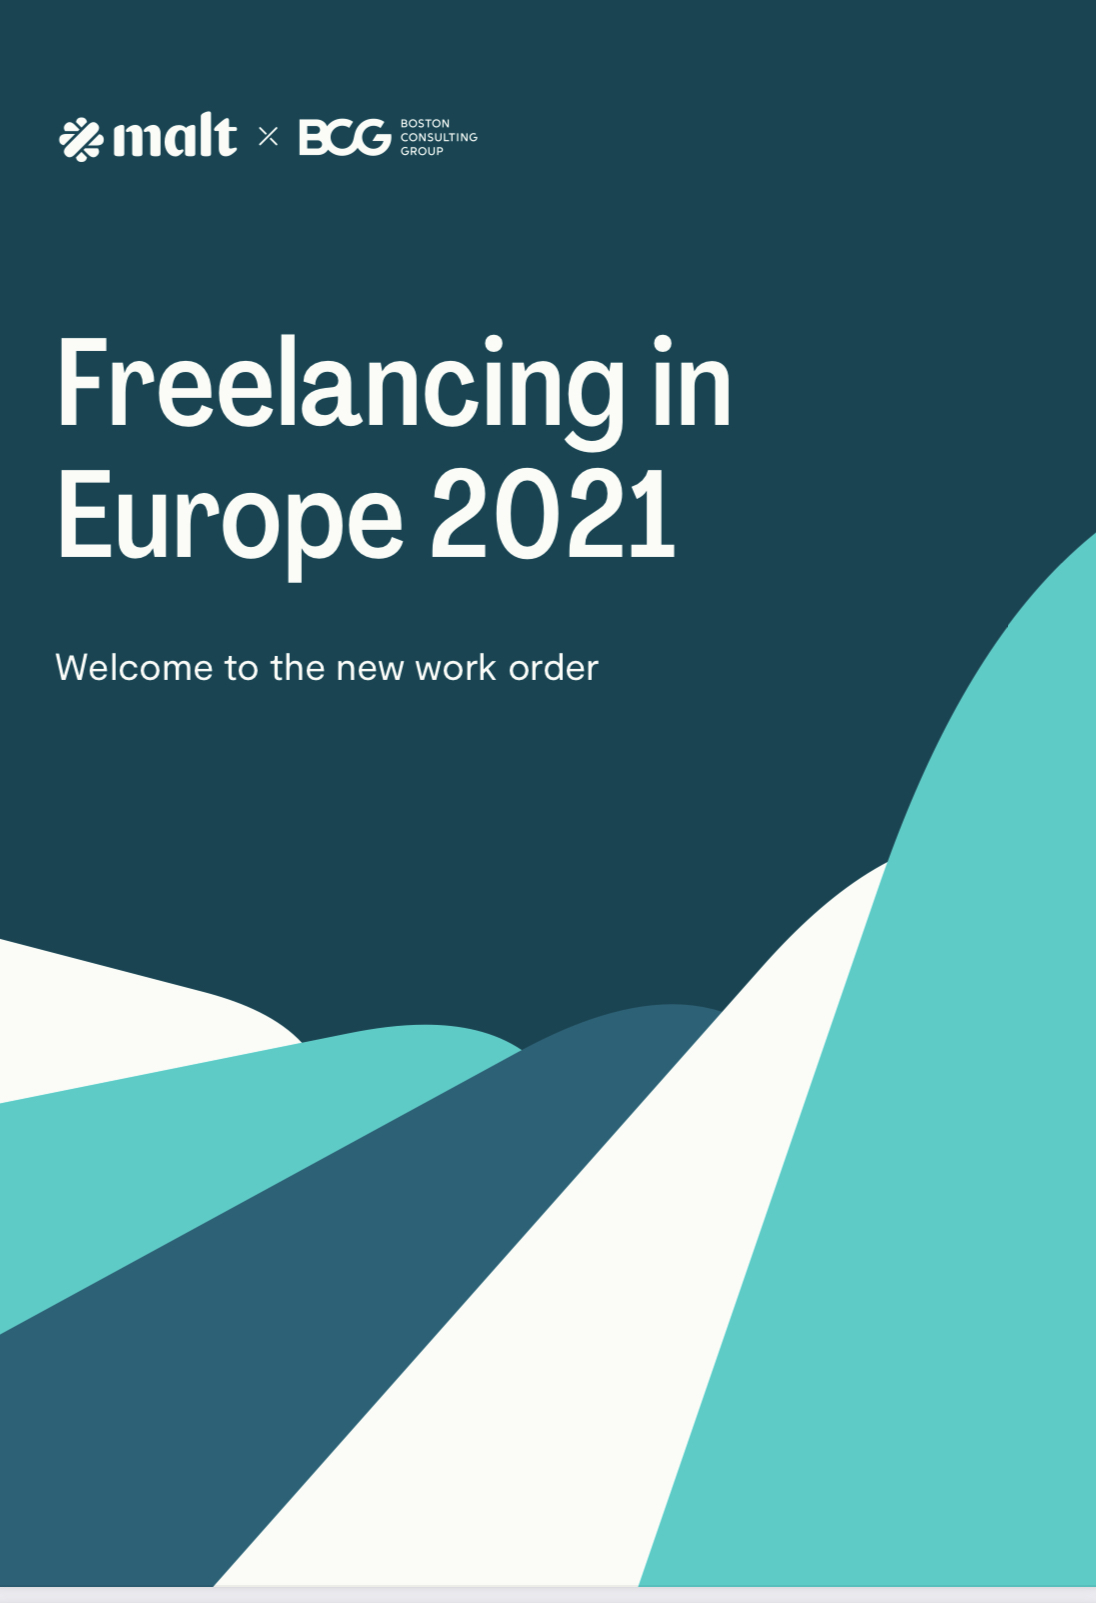 Freelancing in Europe 2021-Welcome to the new work order